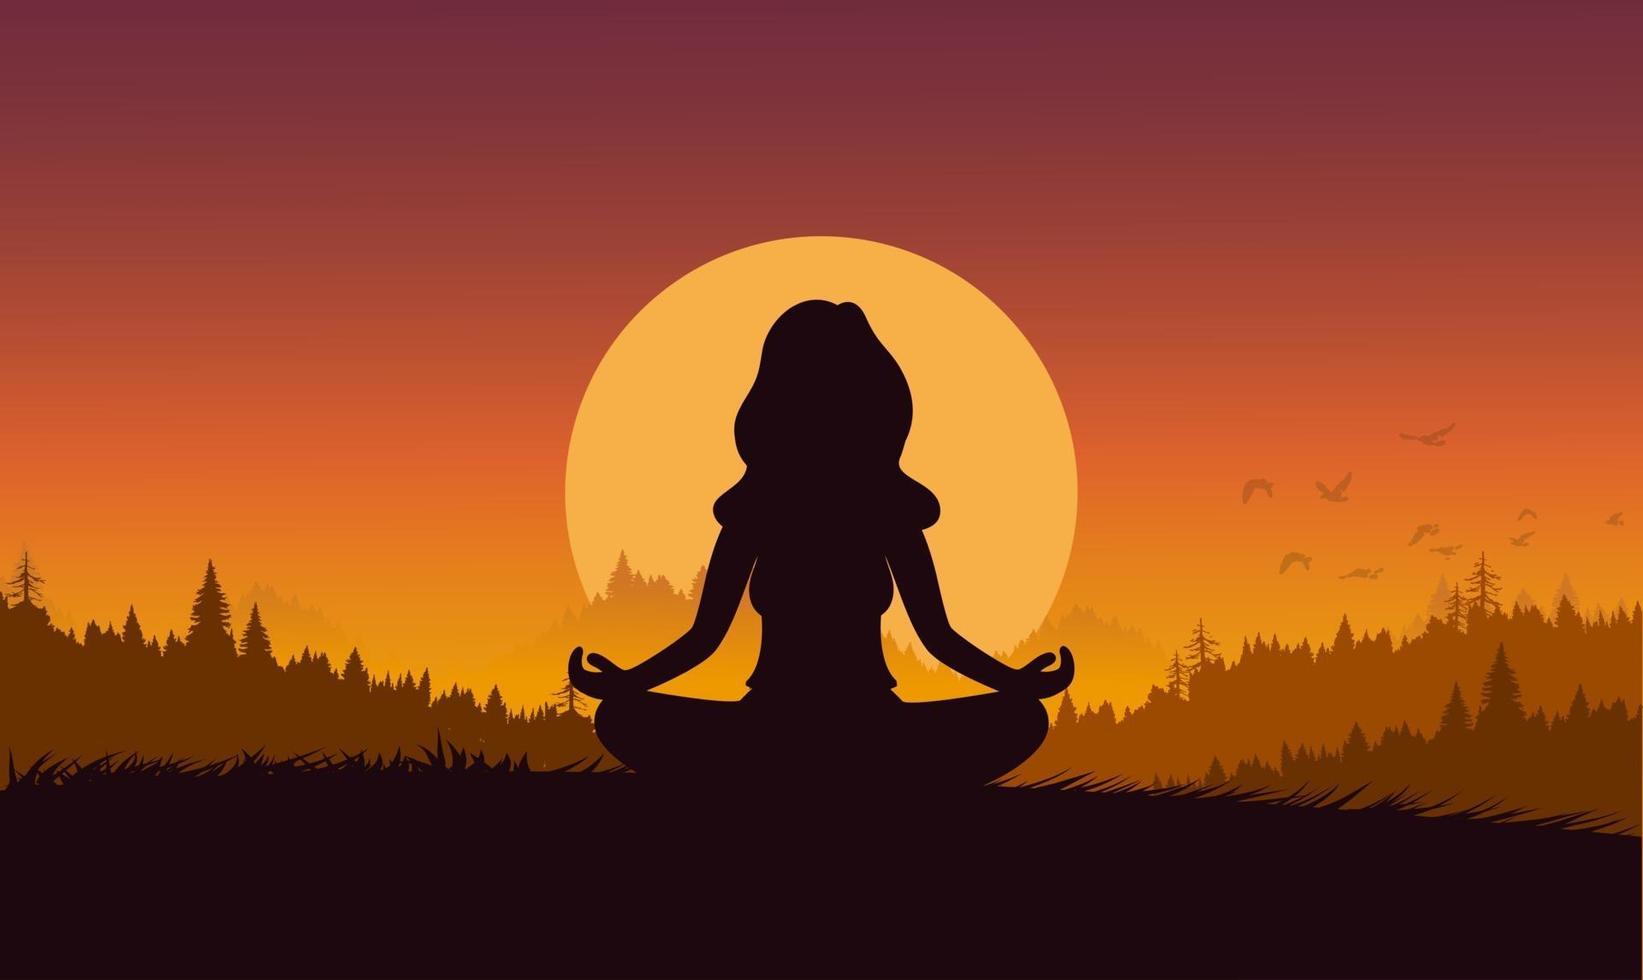 Silhouette flat cartoon style woman meditation or yoga in nature. Concept vector illustration healthy lifestyle.